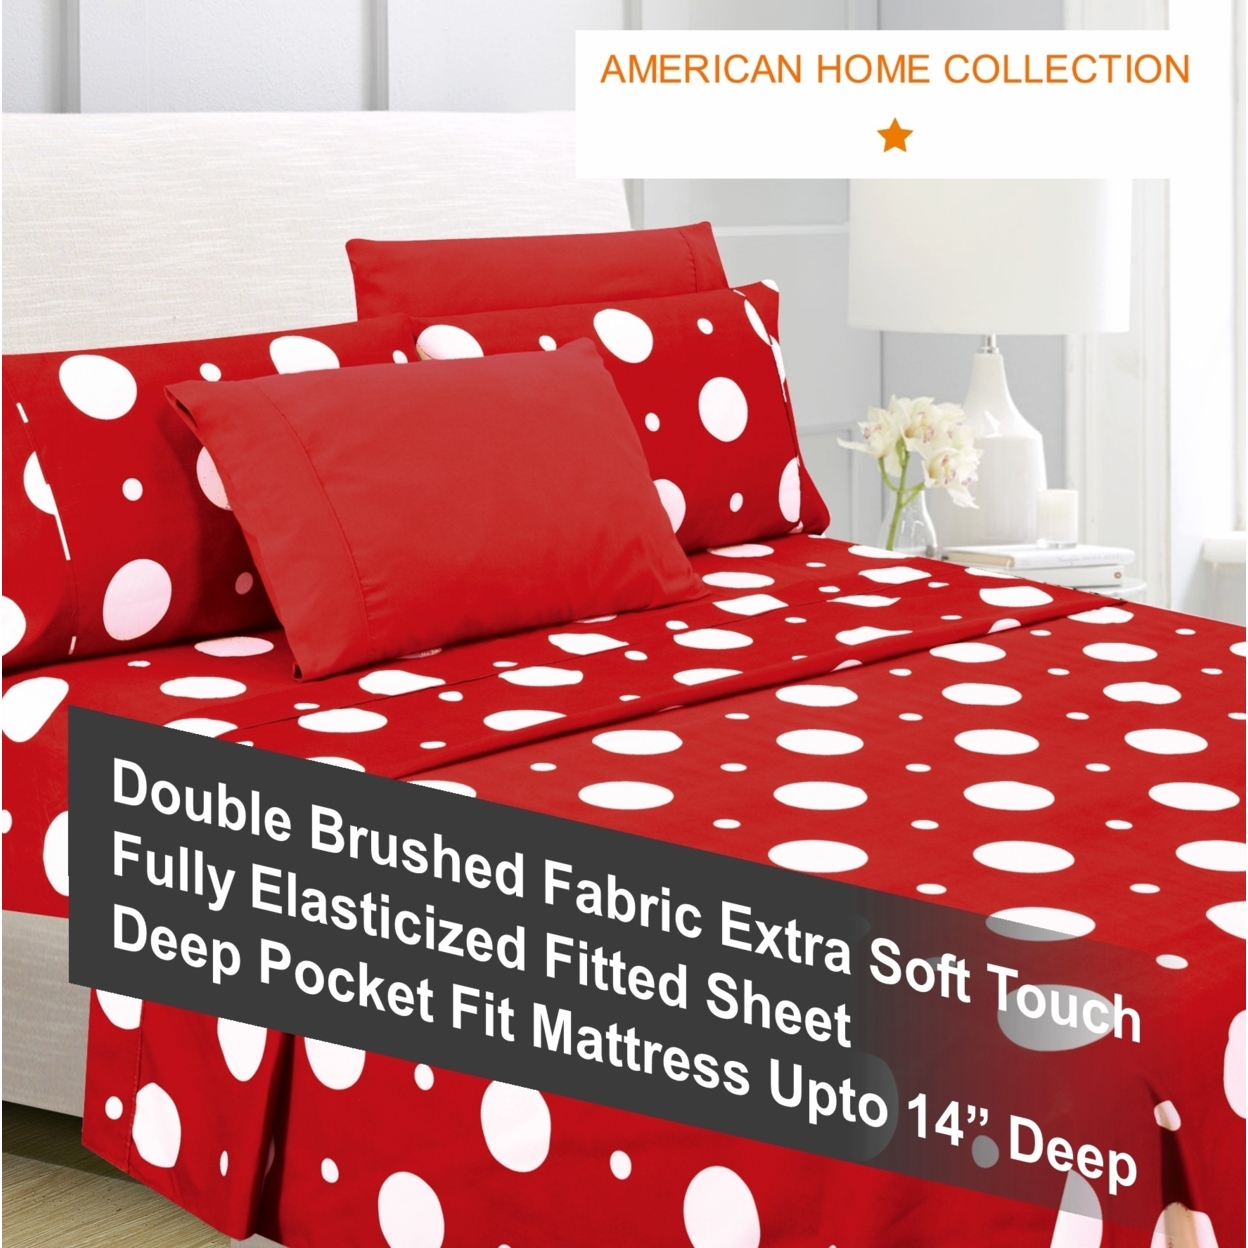 American Home Collection Ultra Soft 4-6 Piece Polka Dot Printed Bed Sheet Set - King, Blue